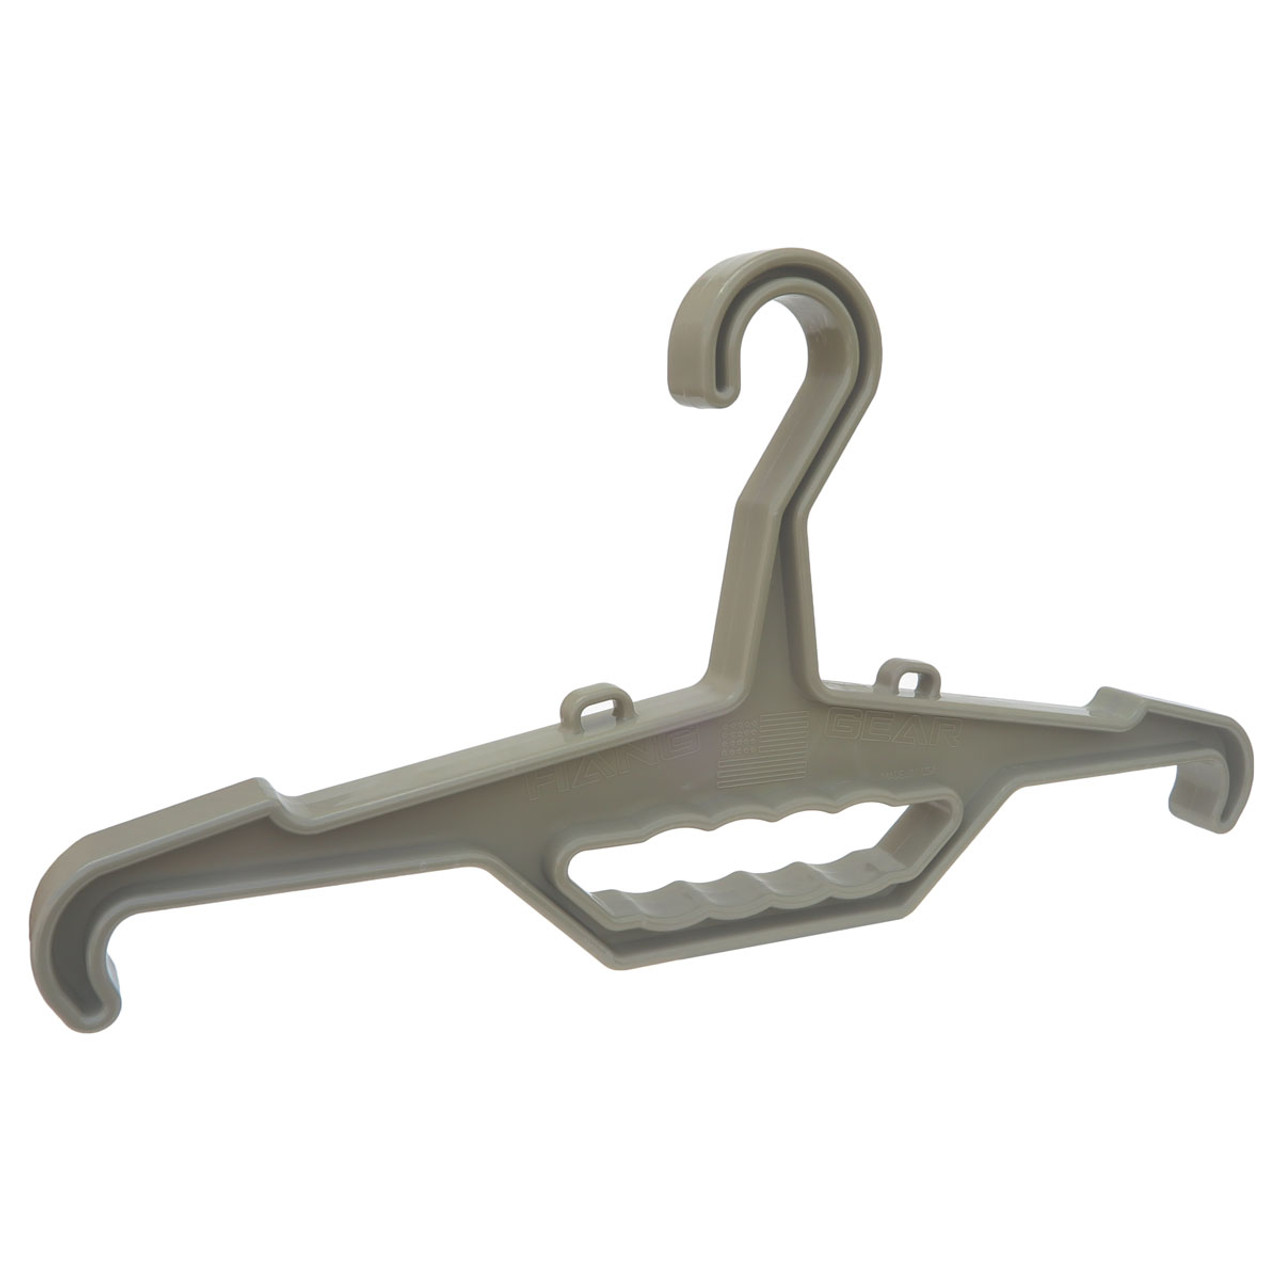 Tough Hook Hanger - Holds up to 150+ of Heavy Gear